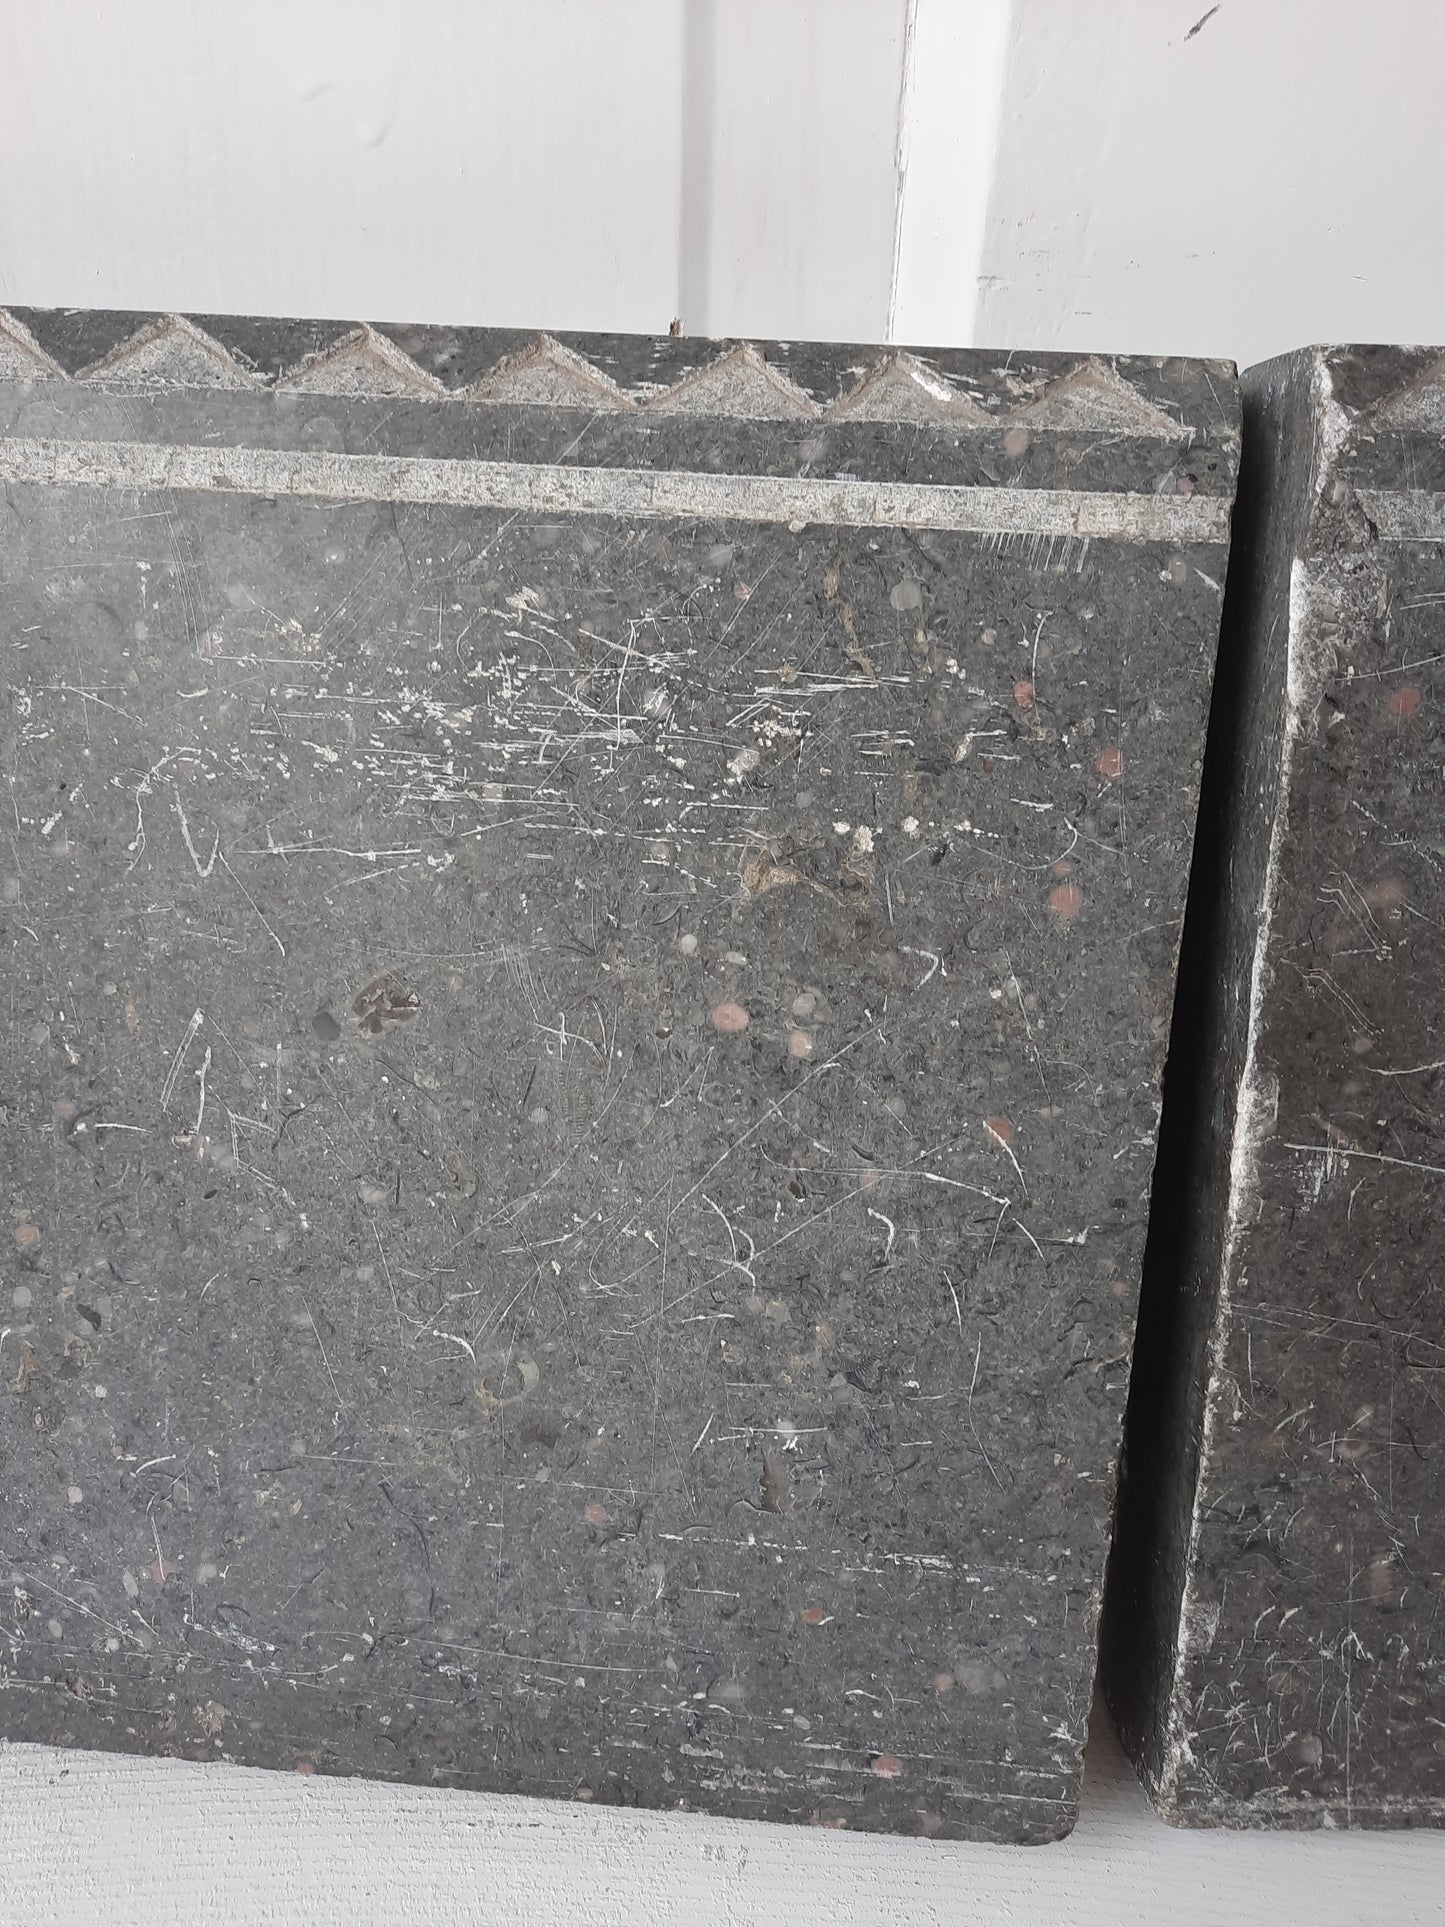 Two Gray Etched Granite Plinth Blocks, Antique Carved Marble or Granite Rosettes or Plinths